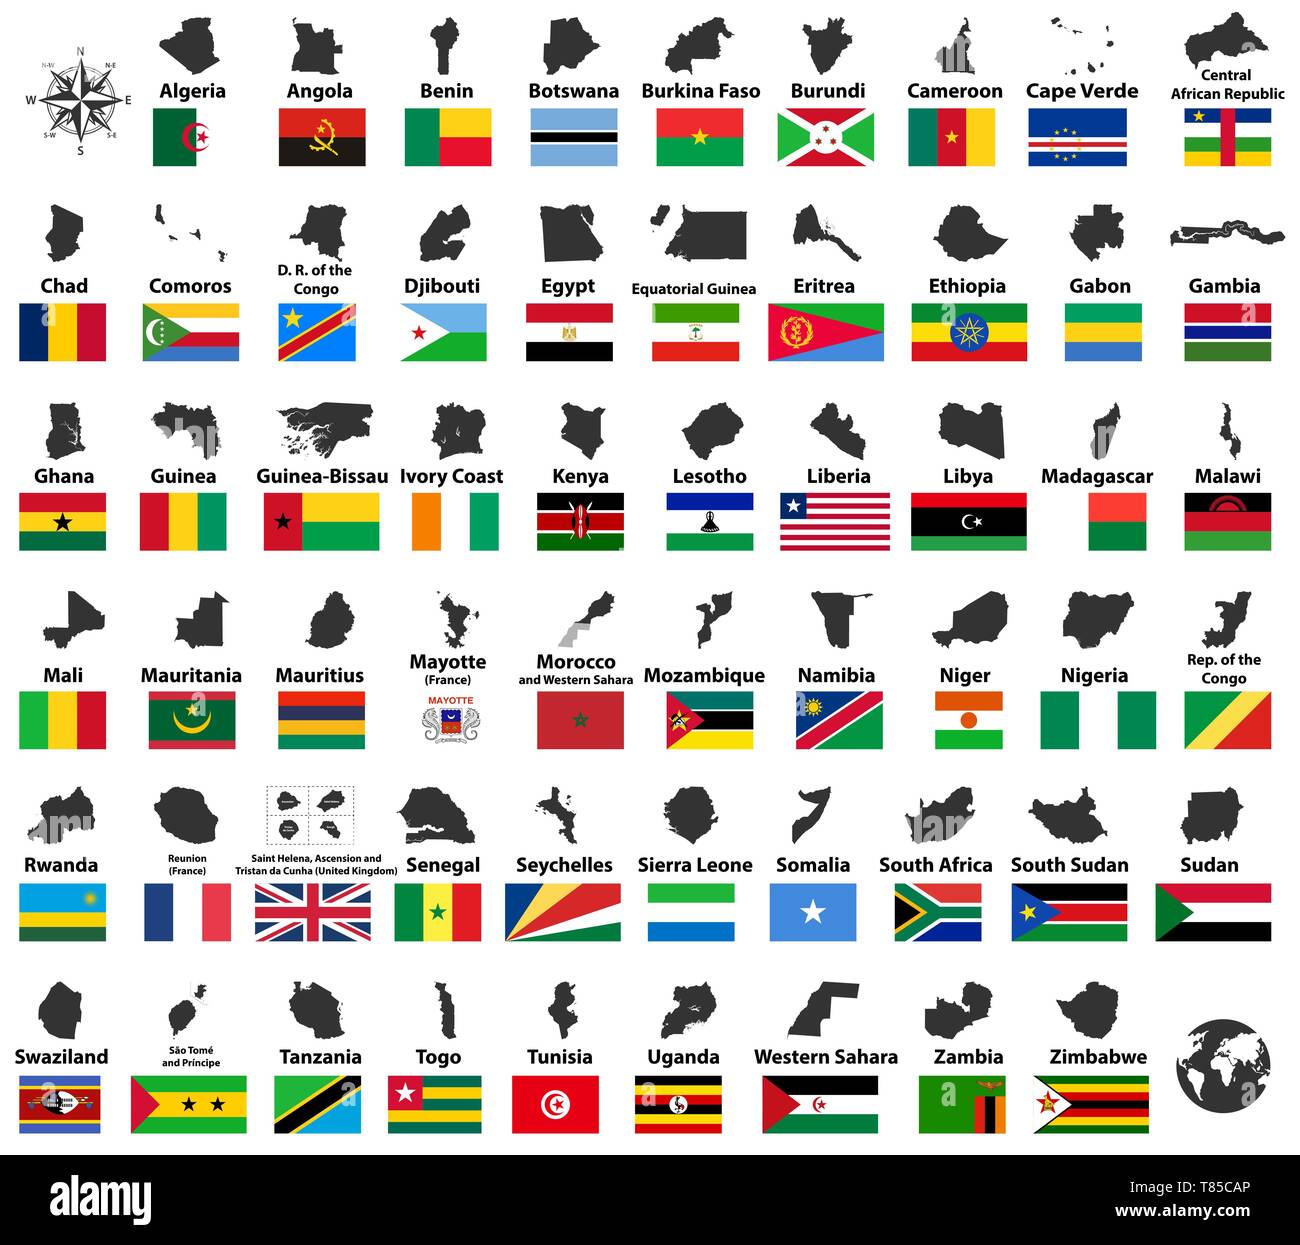 All Vector High Detailed Maps And Flags Of African Countries Arranged